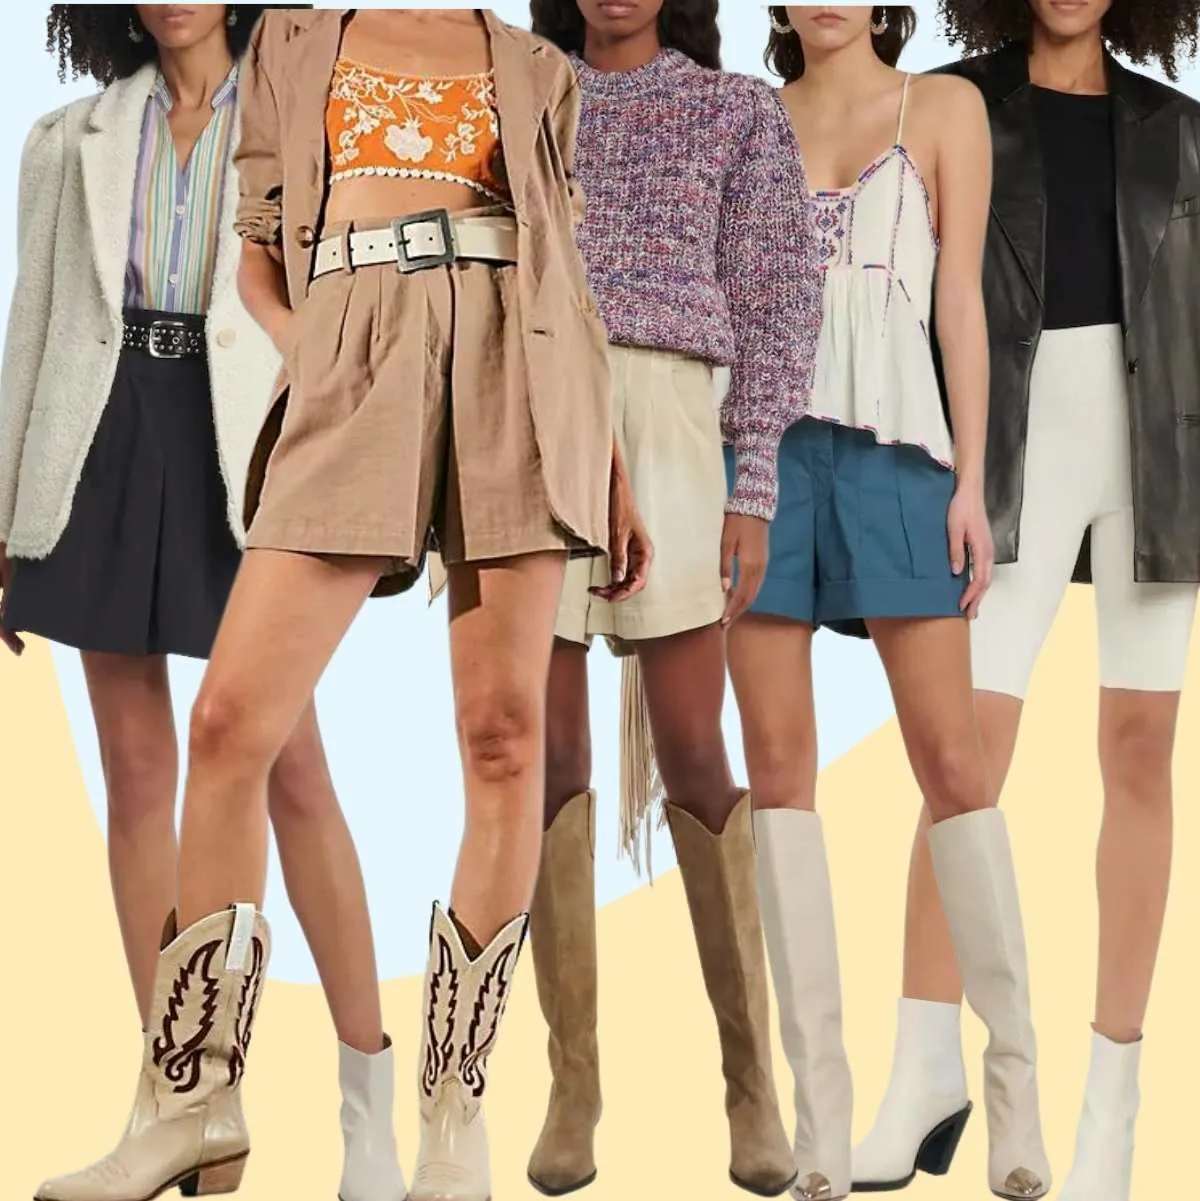 Collage of 5 women wearing different cowboy boots outfits with dress shorts.